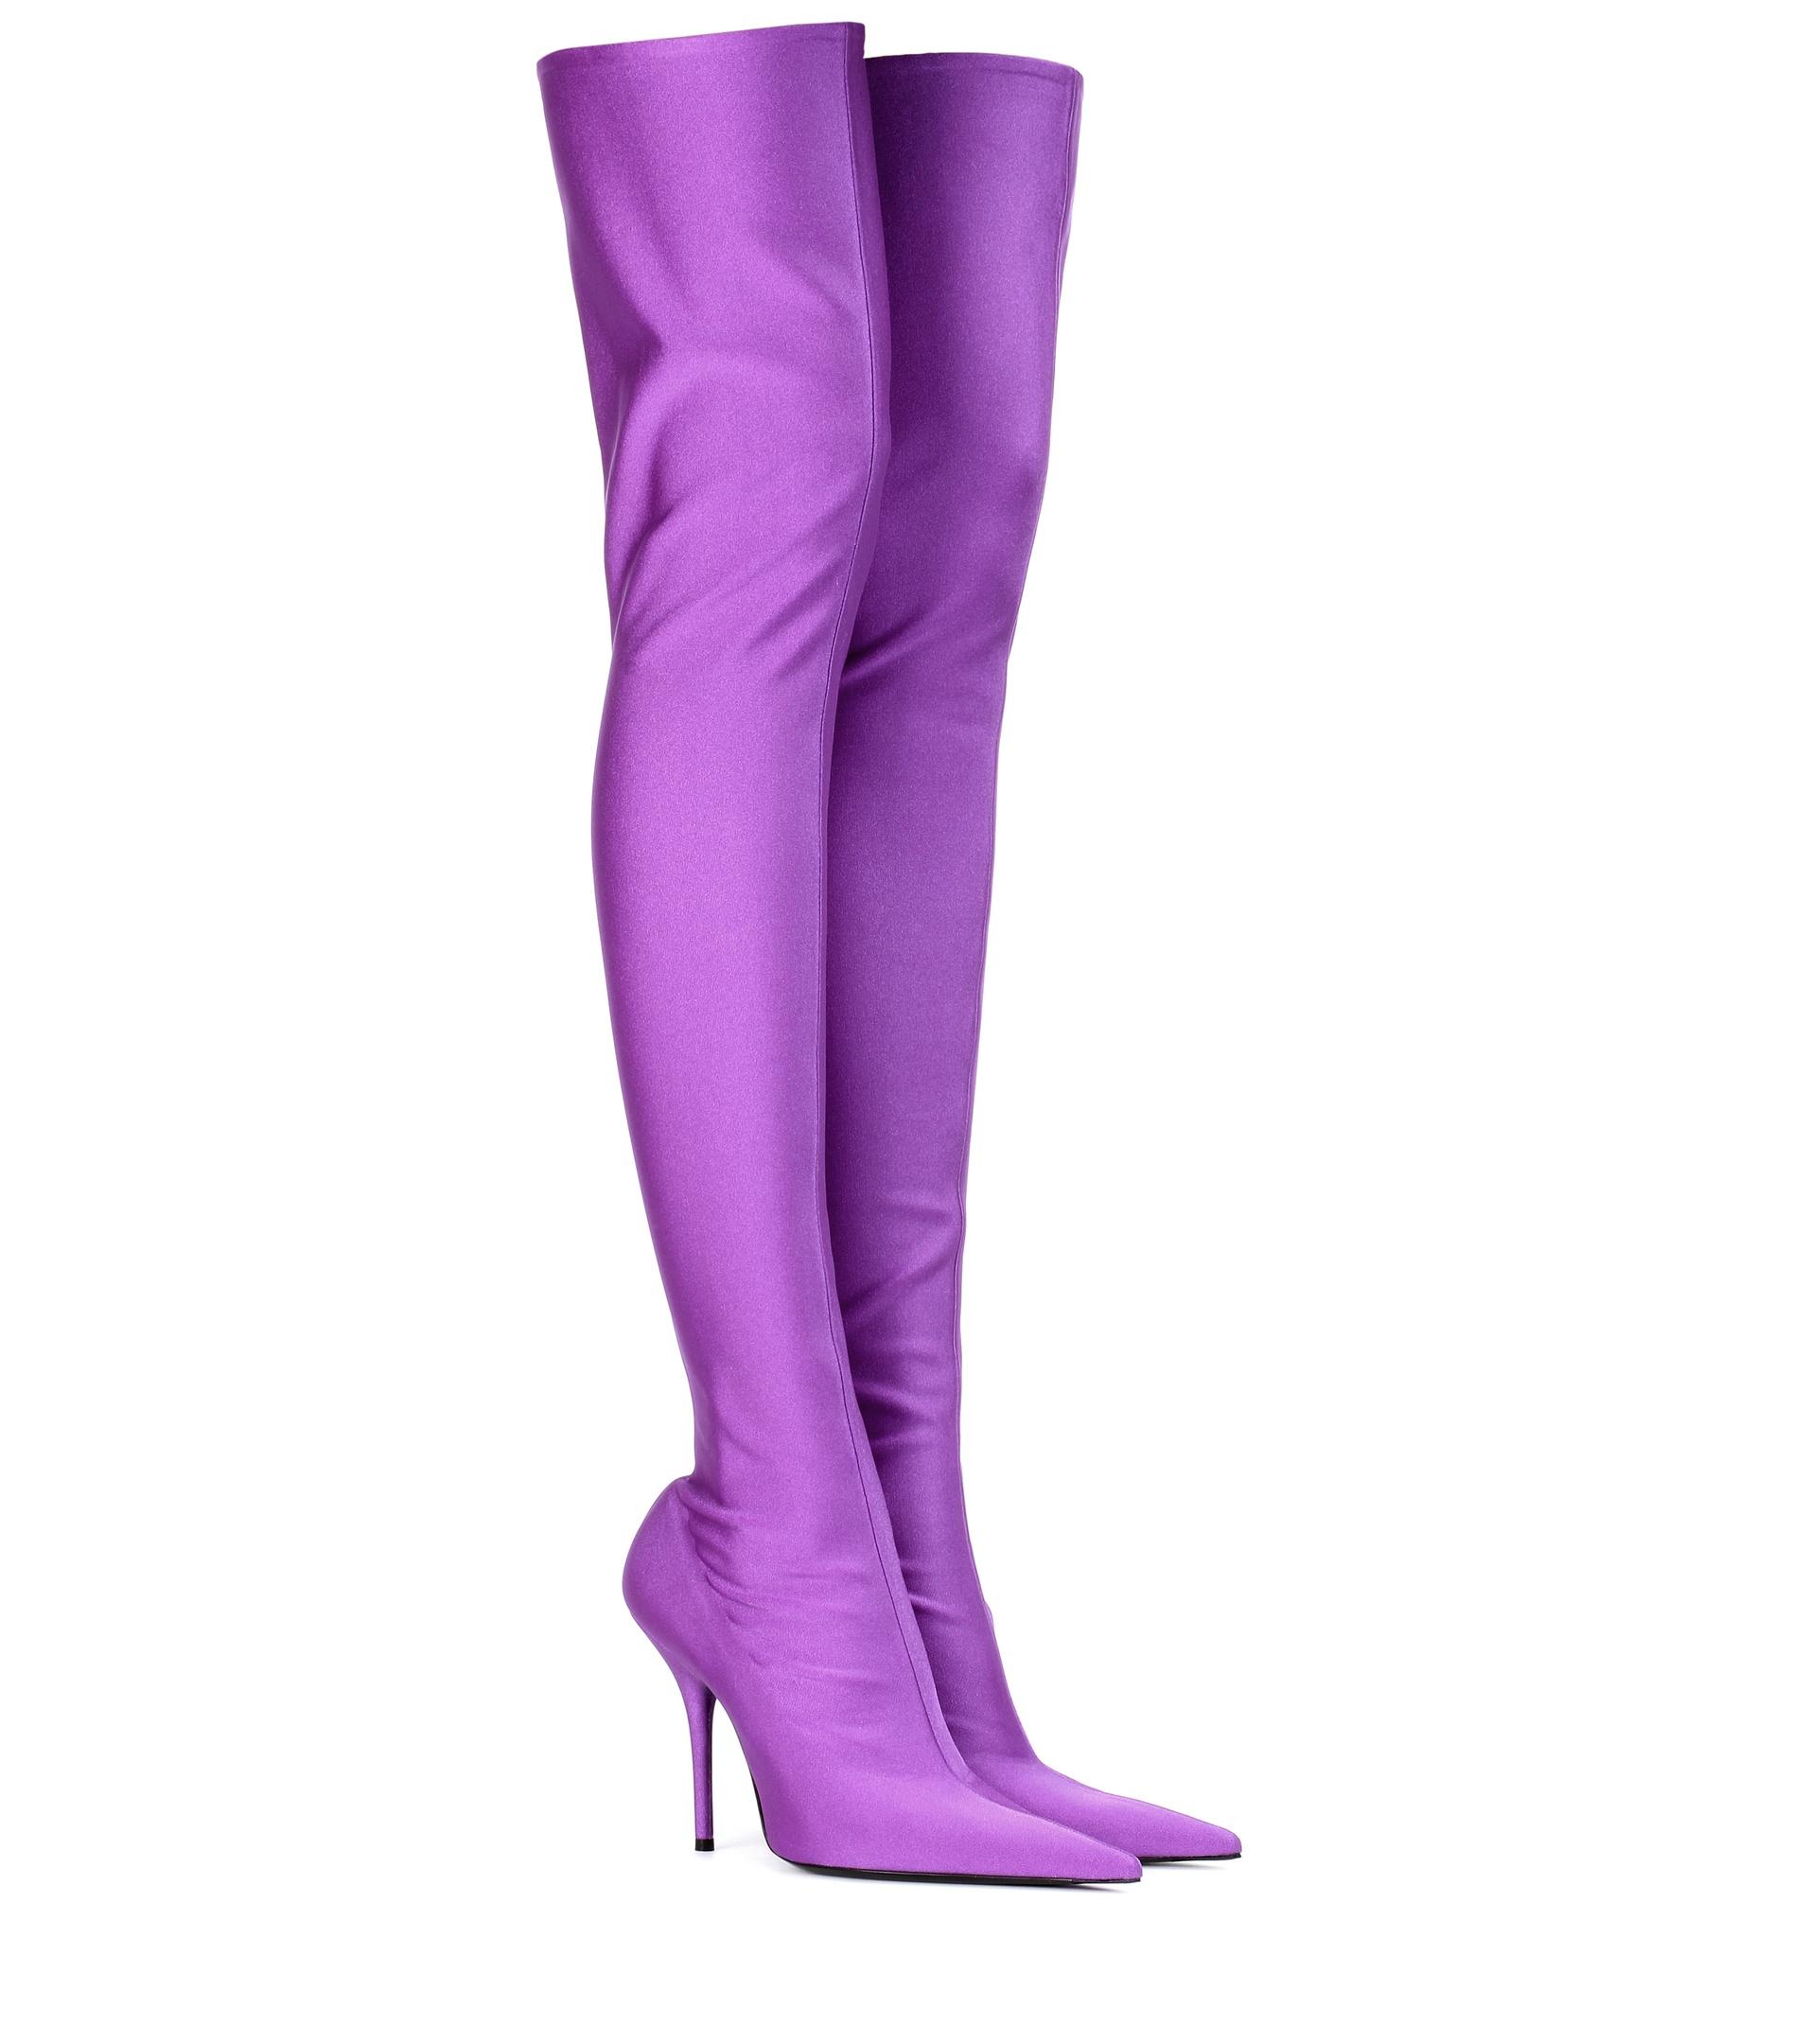 Balenciaga Knife Over-the-knee-boots in Purple | Lyst